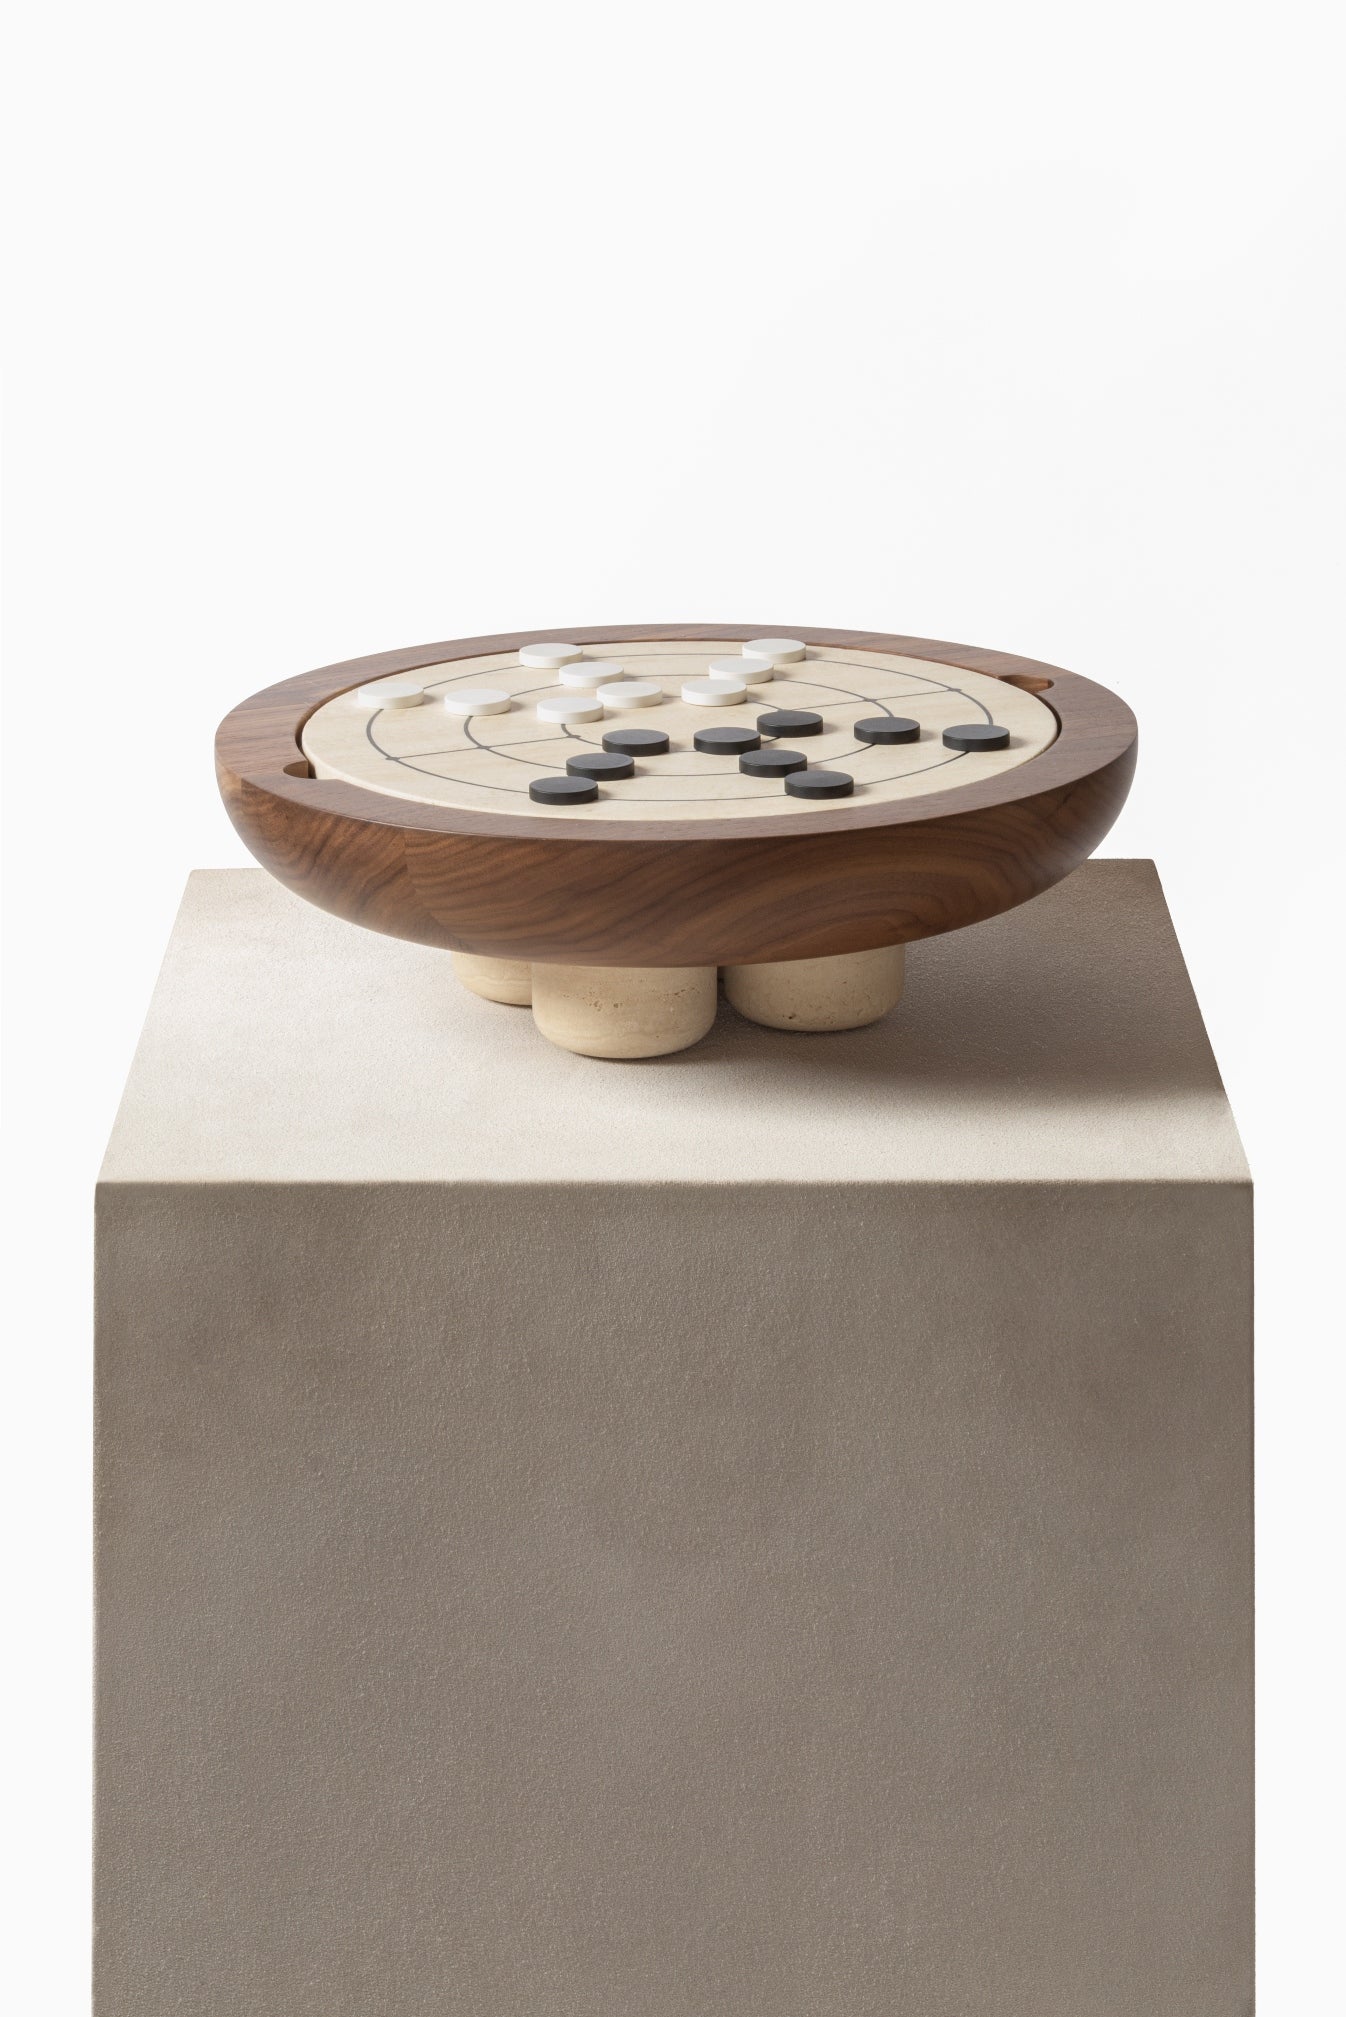 Giobagnara Mocambo Muehle / Tic Tac Toe Game Set | Carved Wood and Stone with Modeled, Almost Primitive Lines | Unique and Artistic Design | Explore a Range of Luxury Board Games, Classic Games, and Gift Games at 2Jour Concierge, #1 luxury high-end gift & lifestyle shop